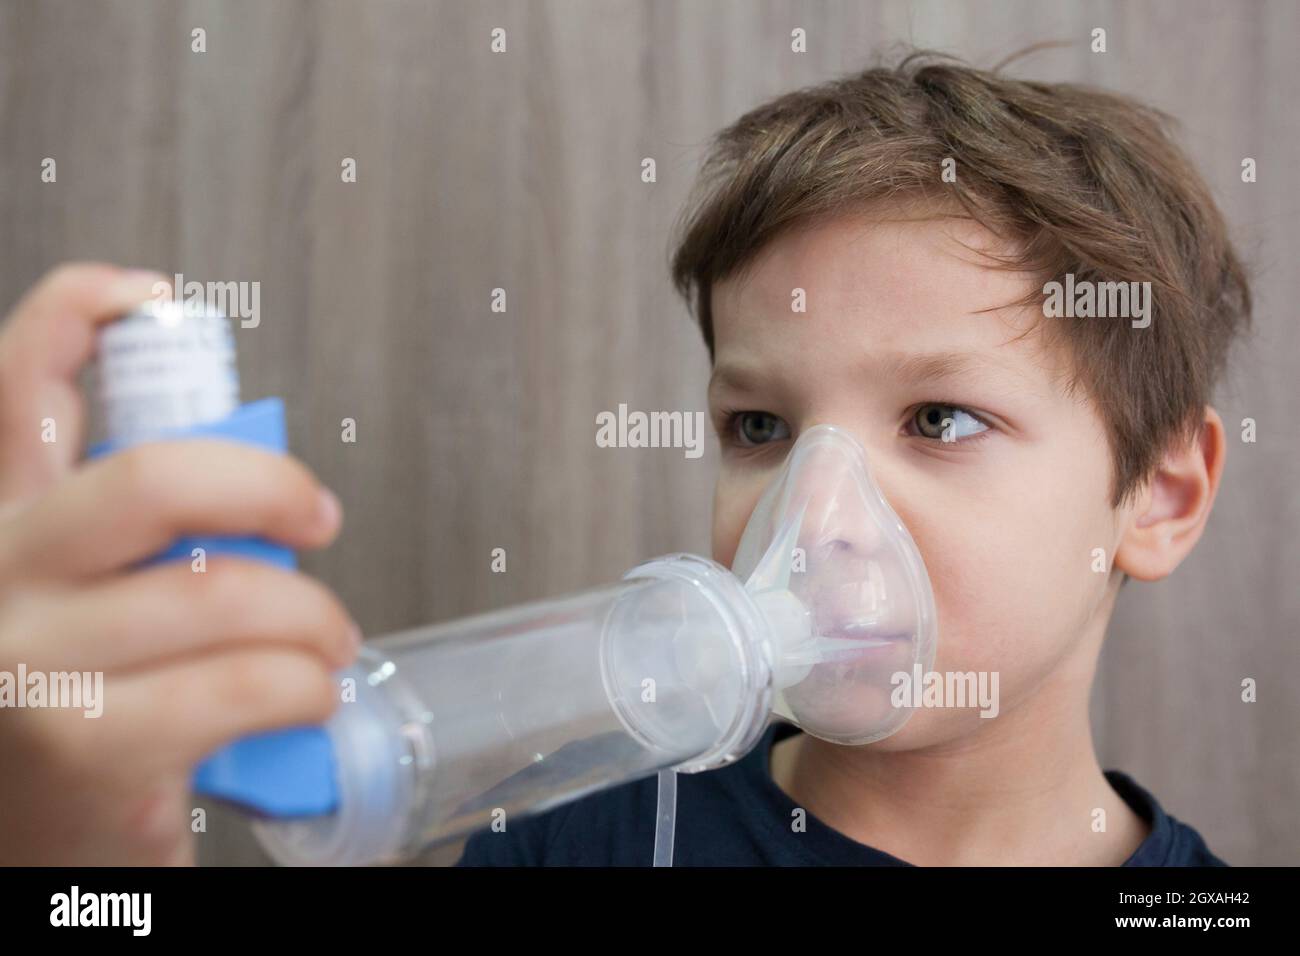 Child boy using medical spray for breath. Inhaler, spacer and mask. Side view. Stock Photo